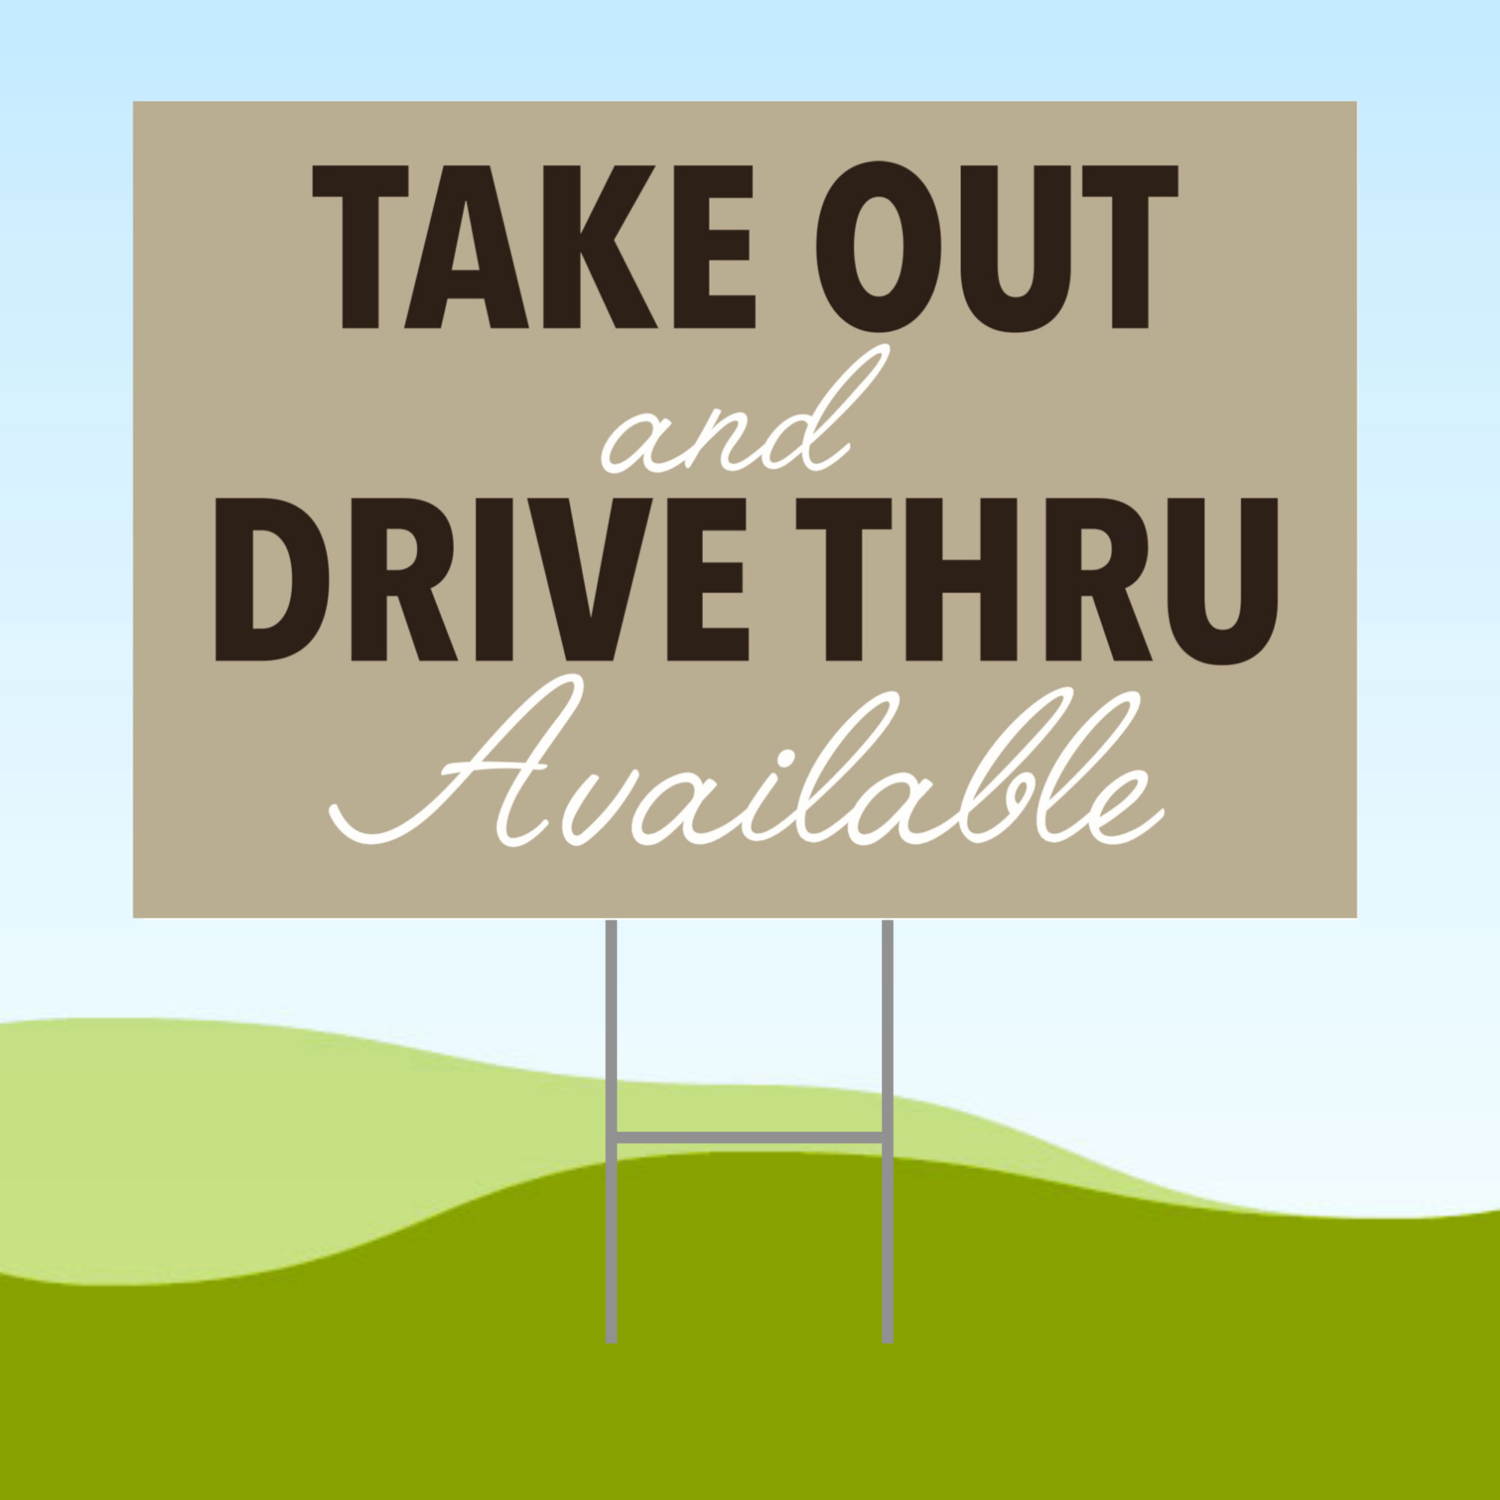 Take Out & Drive Thru Available 18x24 Yard Sign WITH STAKE Corrugated Plastic Bandit